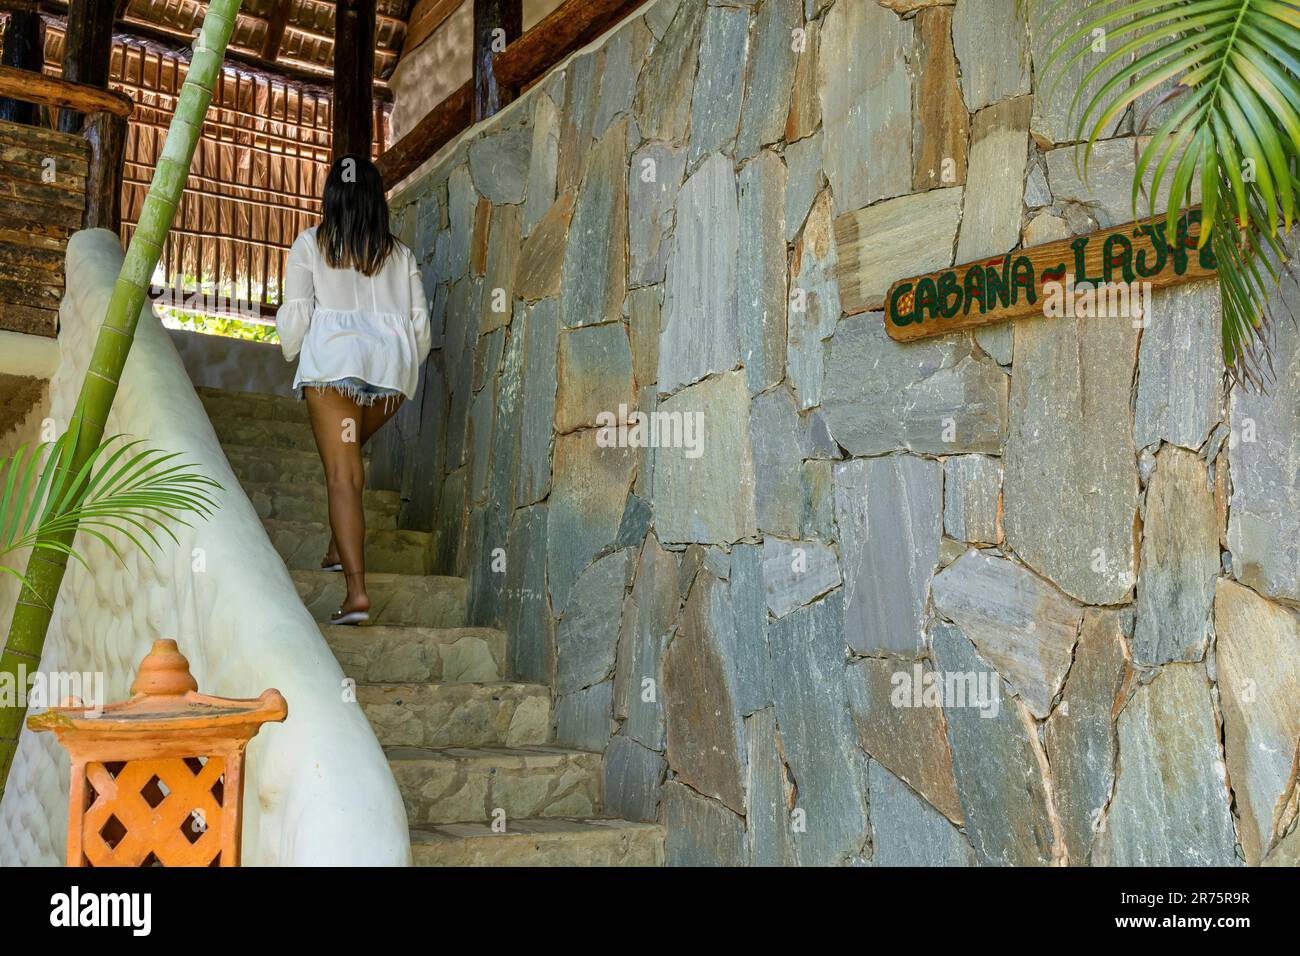 North America, Caribbean, Greater Antilles, Hispaniola Island, Dominican Republic, North Coast, Puerto Plata Province, Cabarete, Young woman climbing the stairs to her bungalow at Boutique Hotel Natura Cabana Stock Photo